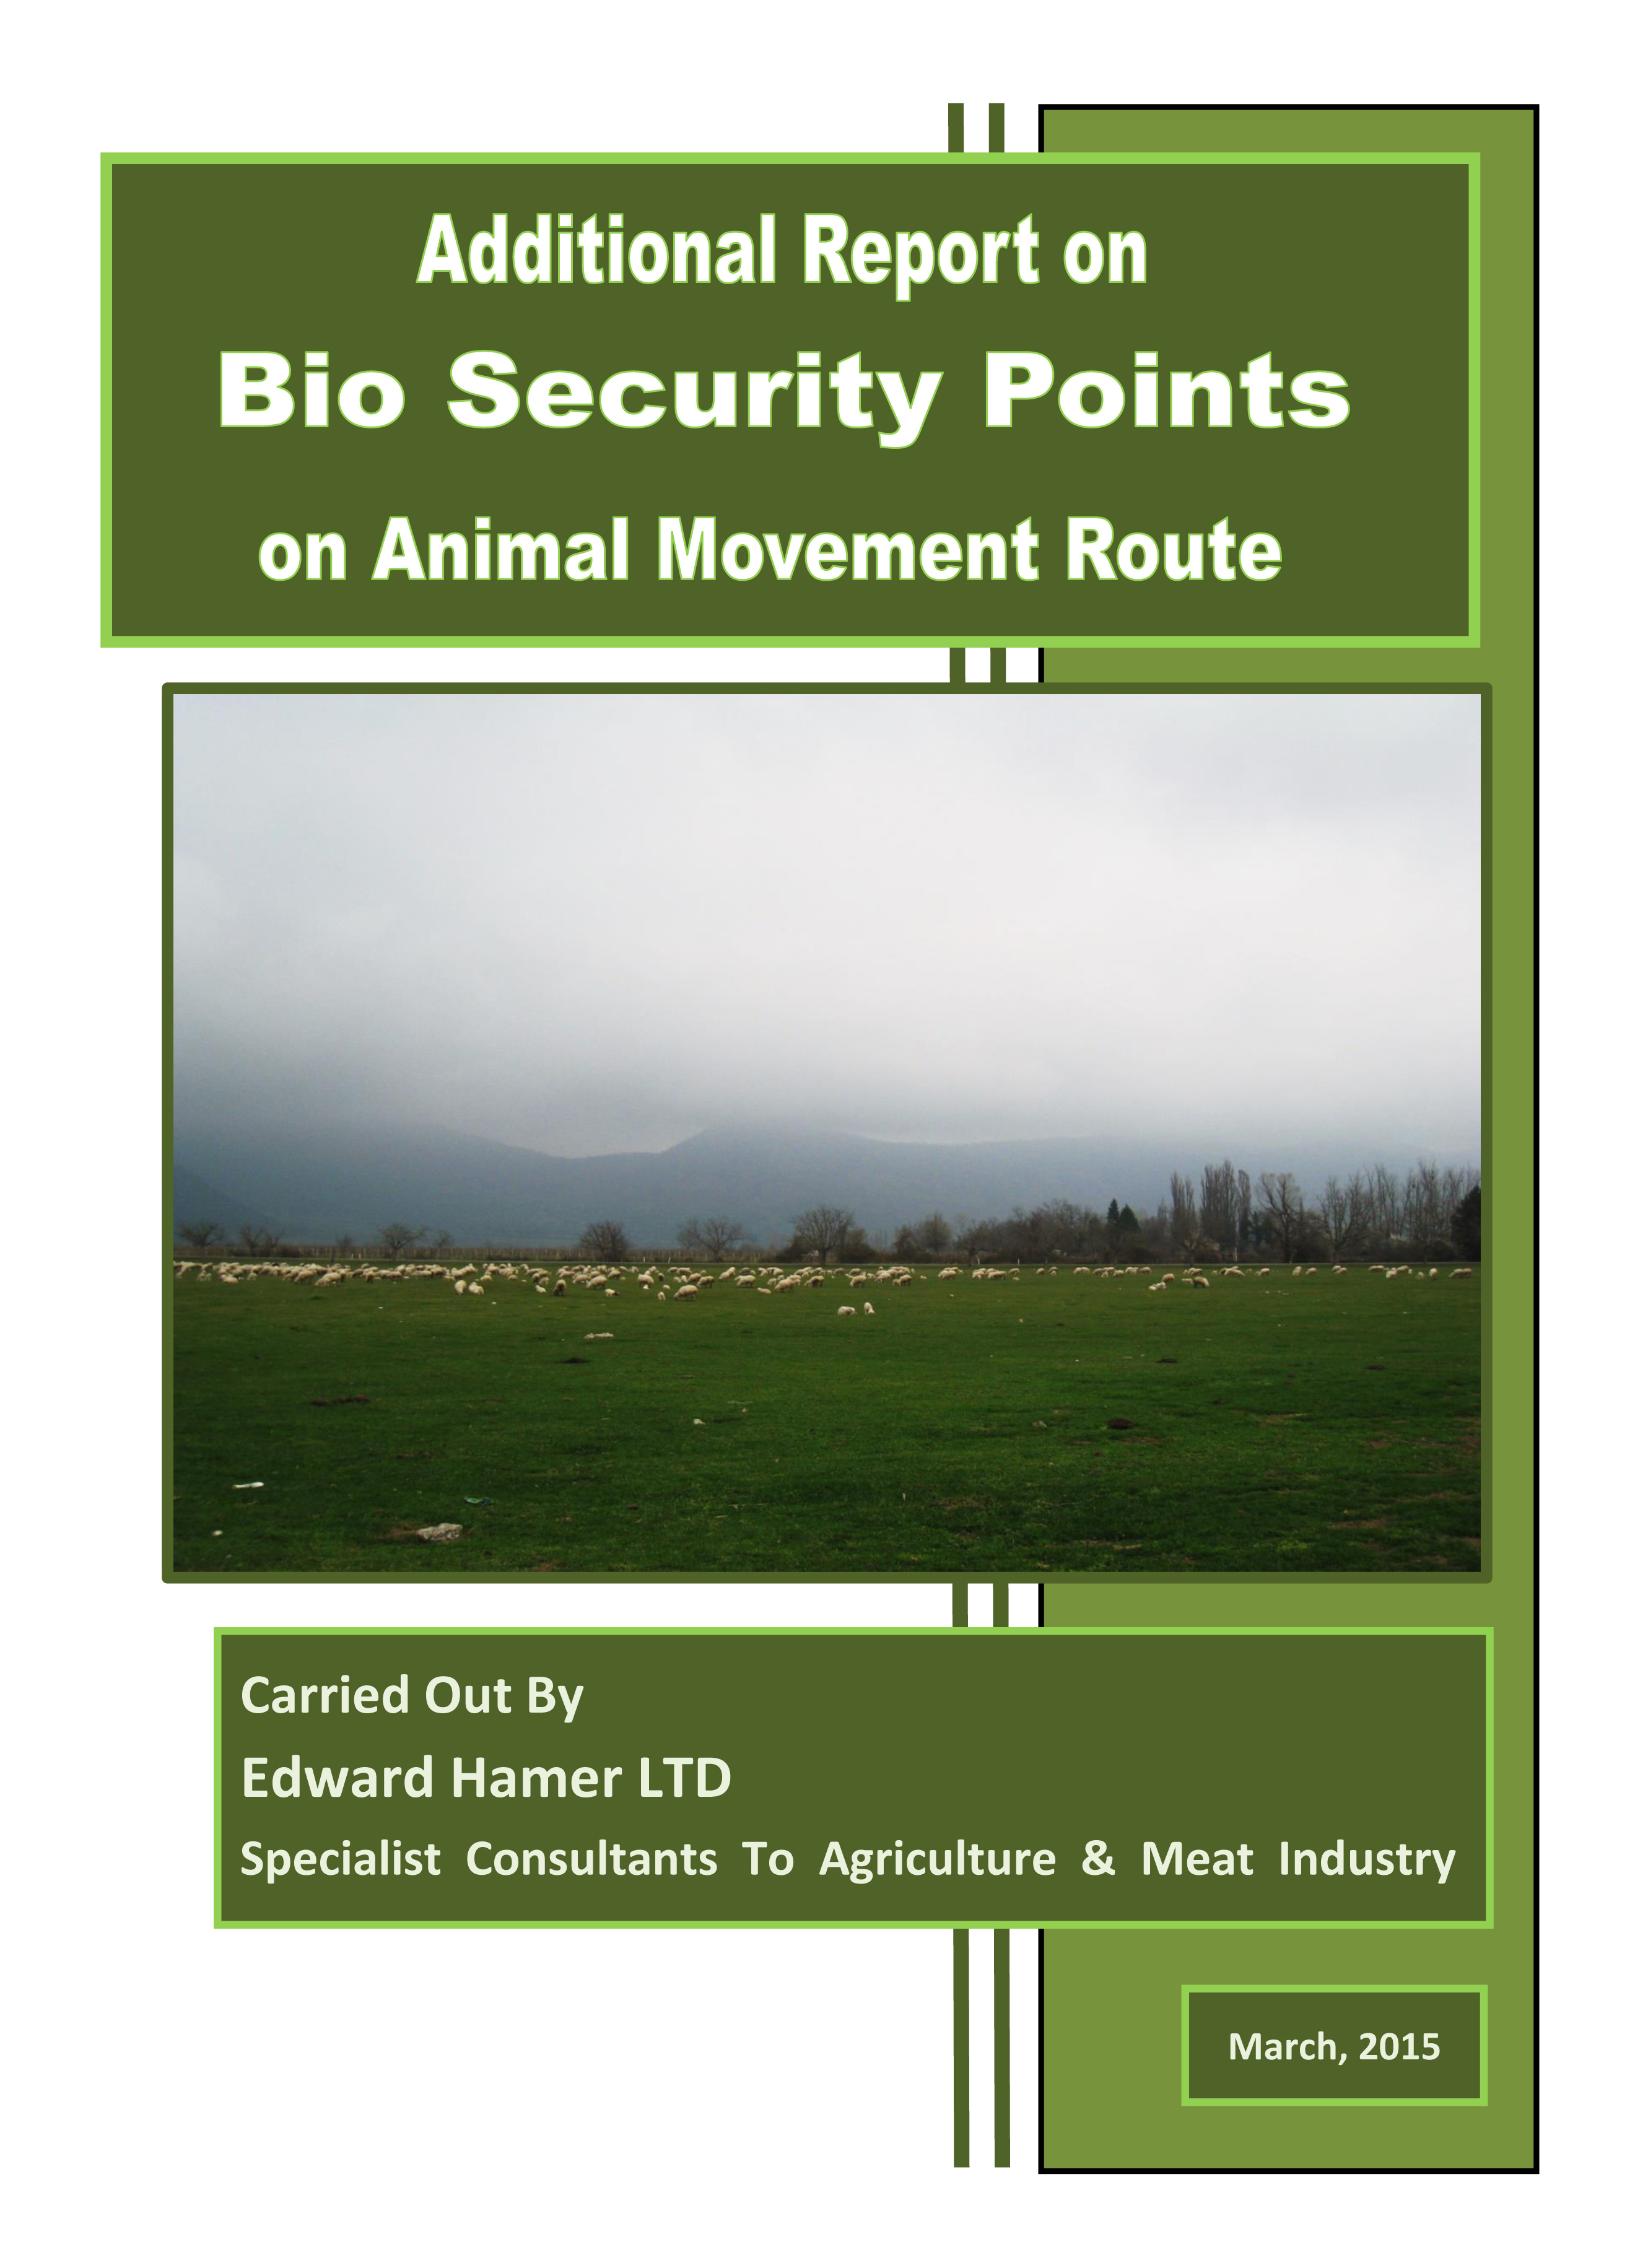 Additional Report on BIO Security Points on Animal Movement Route